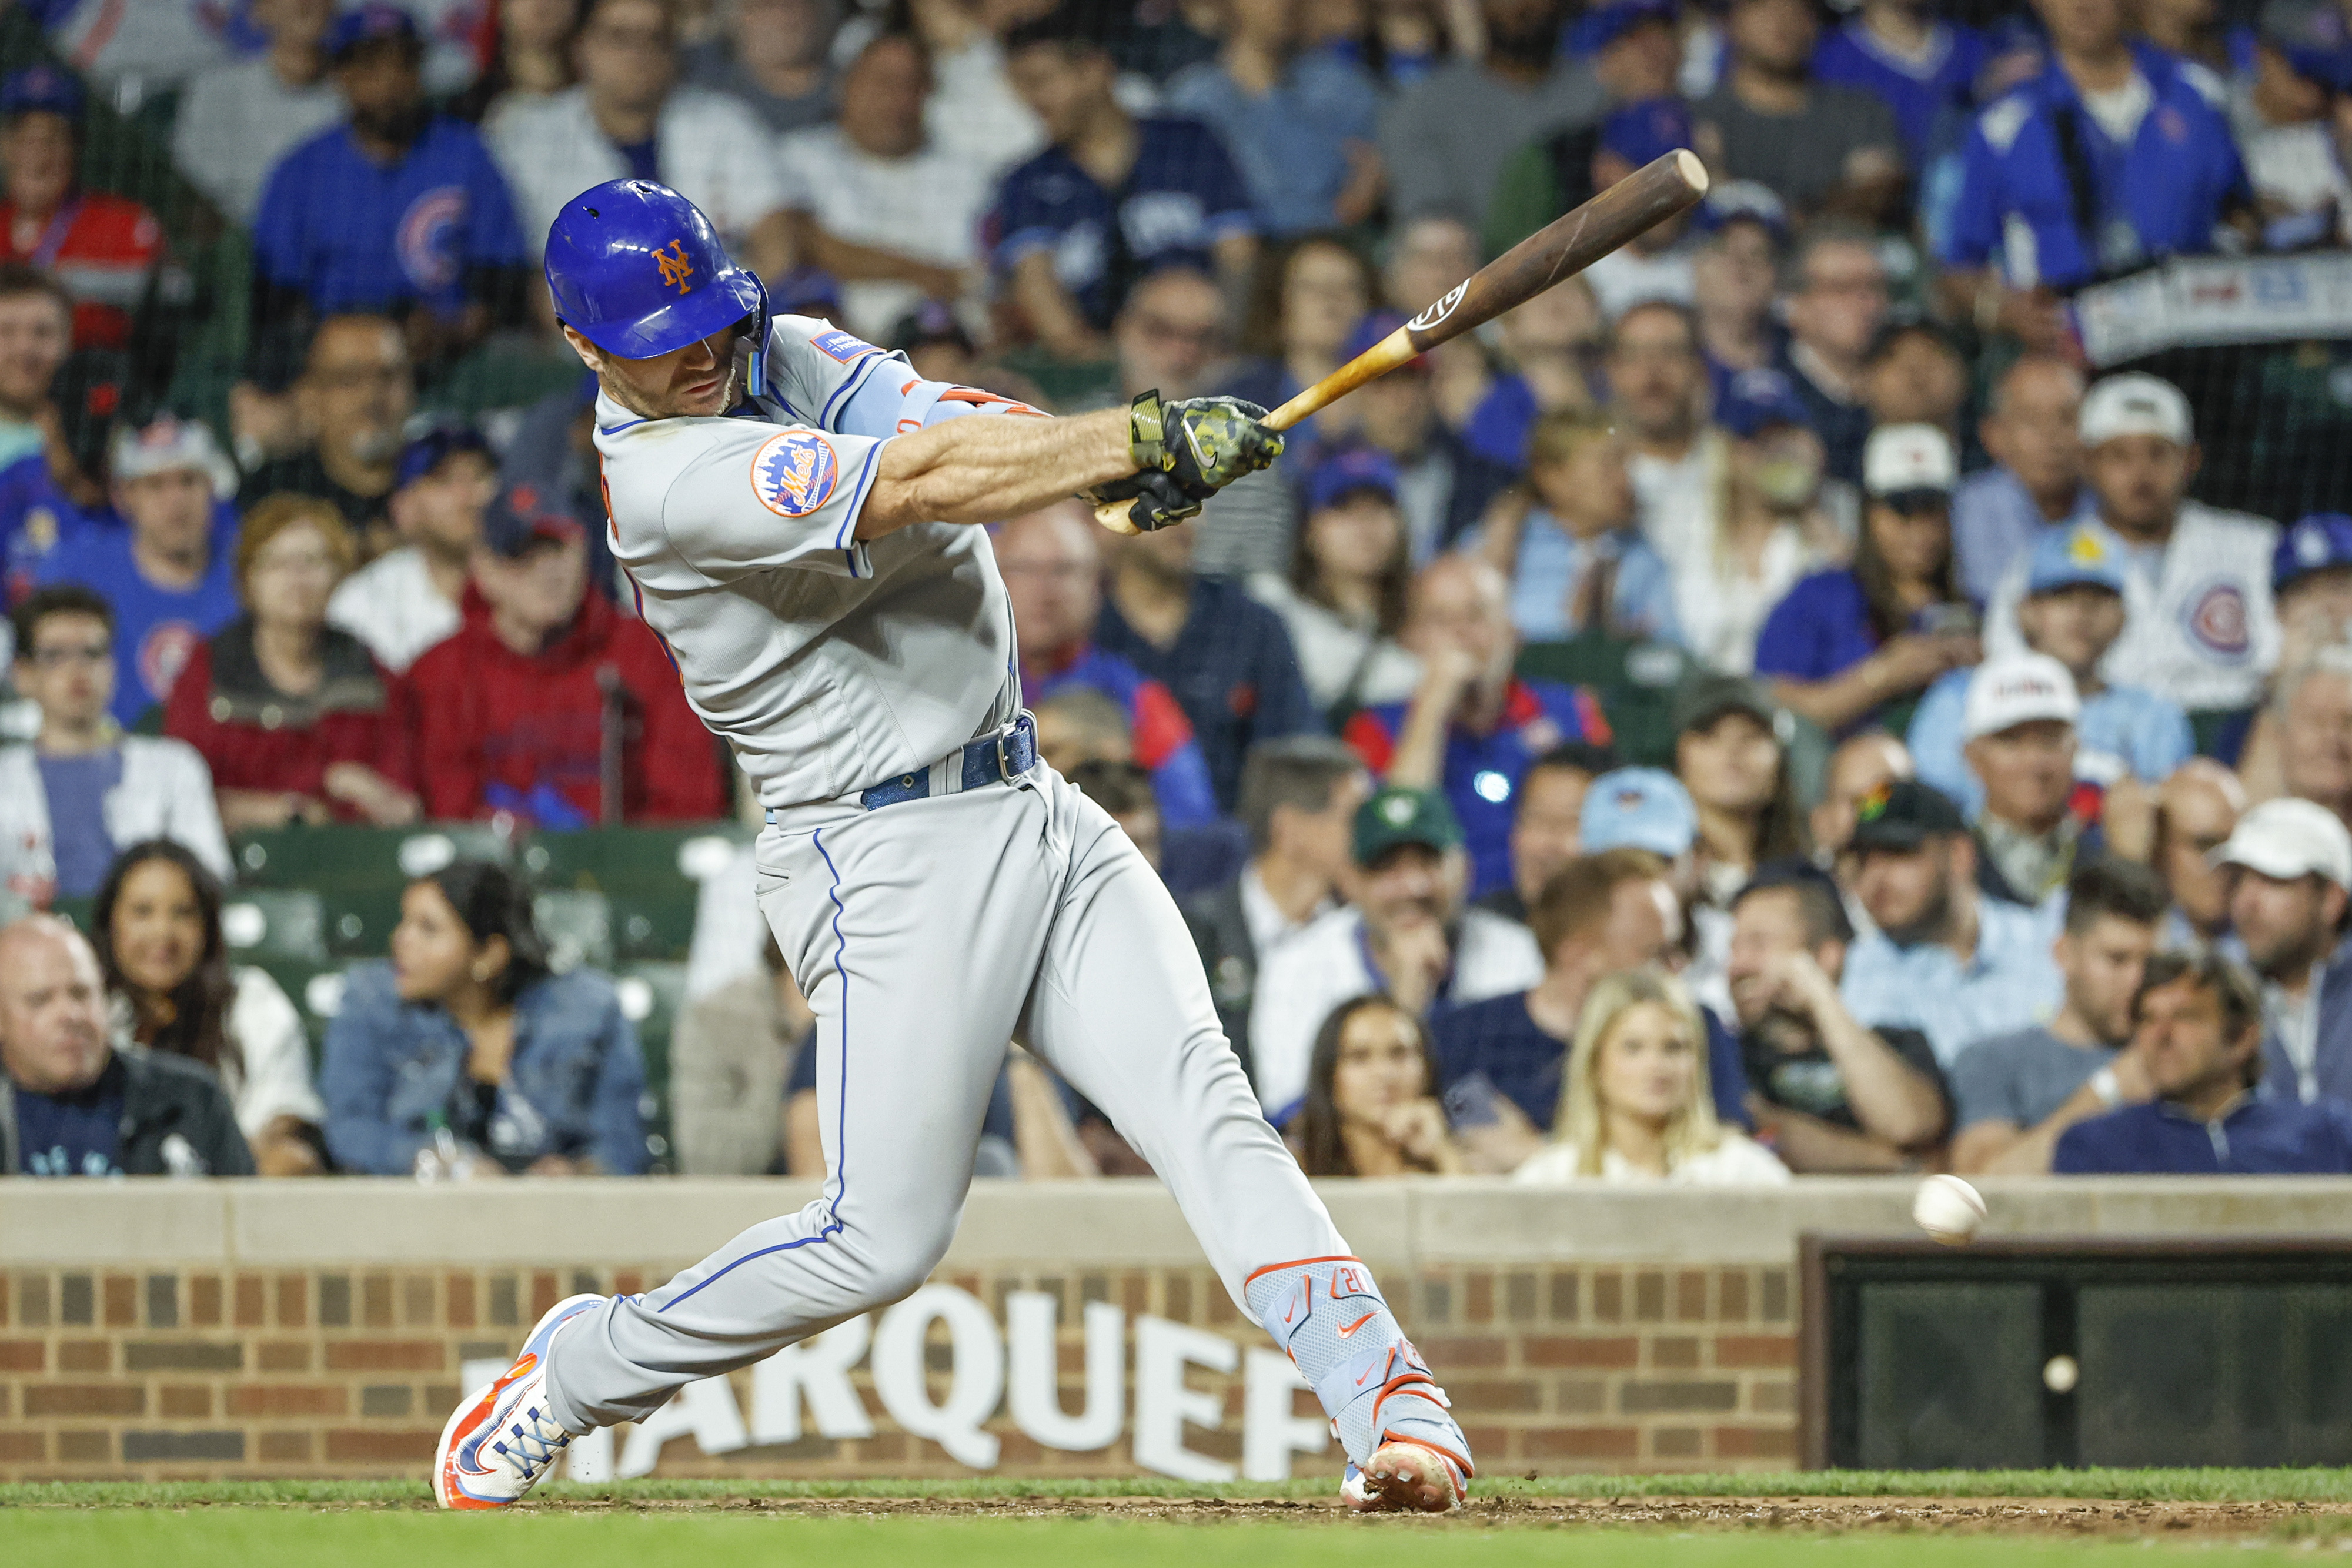 Christopher Morel homers in 5th straight as Cubs club Mets